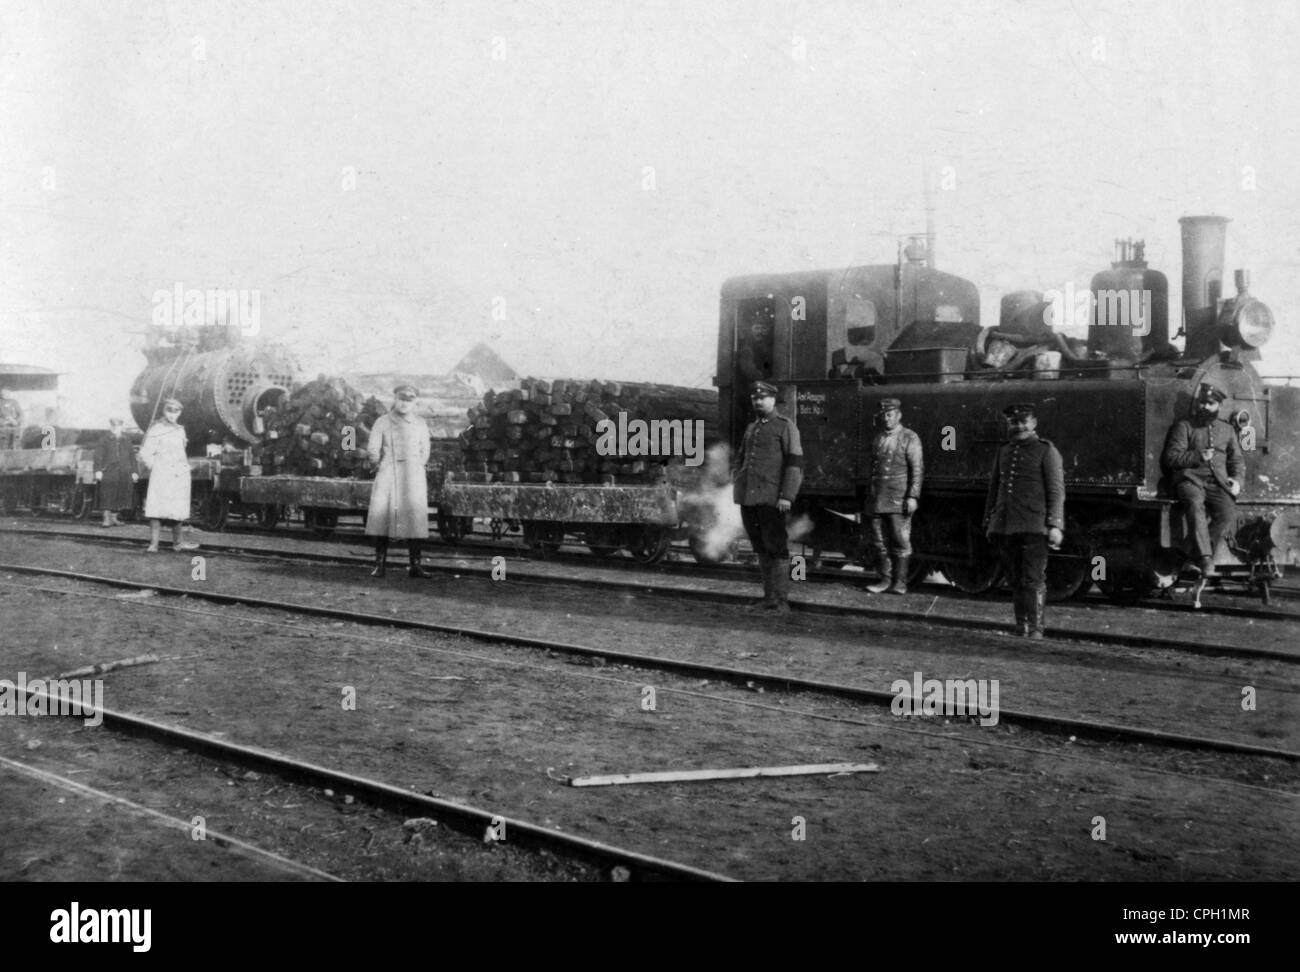 events, First World War / WWI, Western Front 1915 - 1918, German light railway with construction material, France, 28.12.1915, 20th century, historic, historical, 1910s, 10s, army, military, Germany, German Reich, Empire, engineers, steam locomotive, locomotives, narrow-gauge, narrow gauge, soldiers, goods, freight train, rear area, people, Additional-Rights-Clearences-Not Available